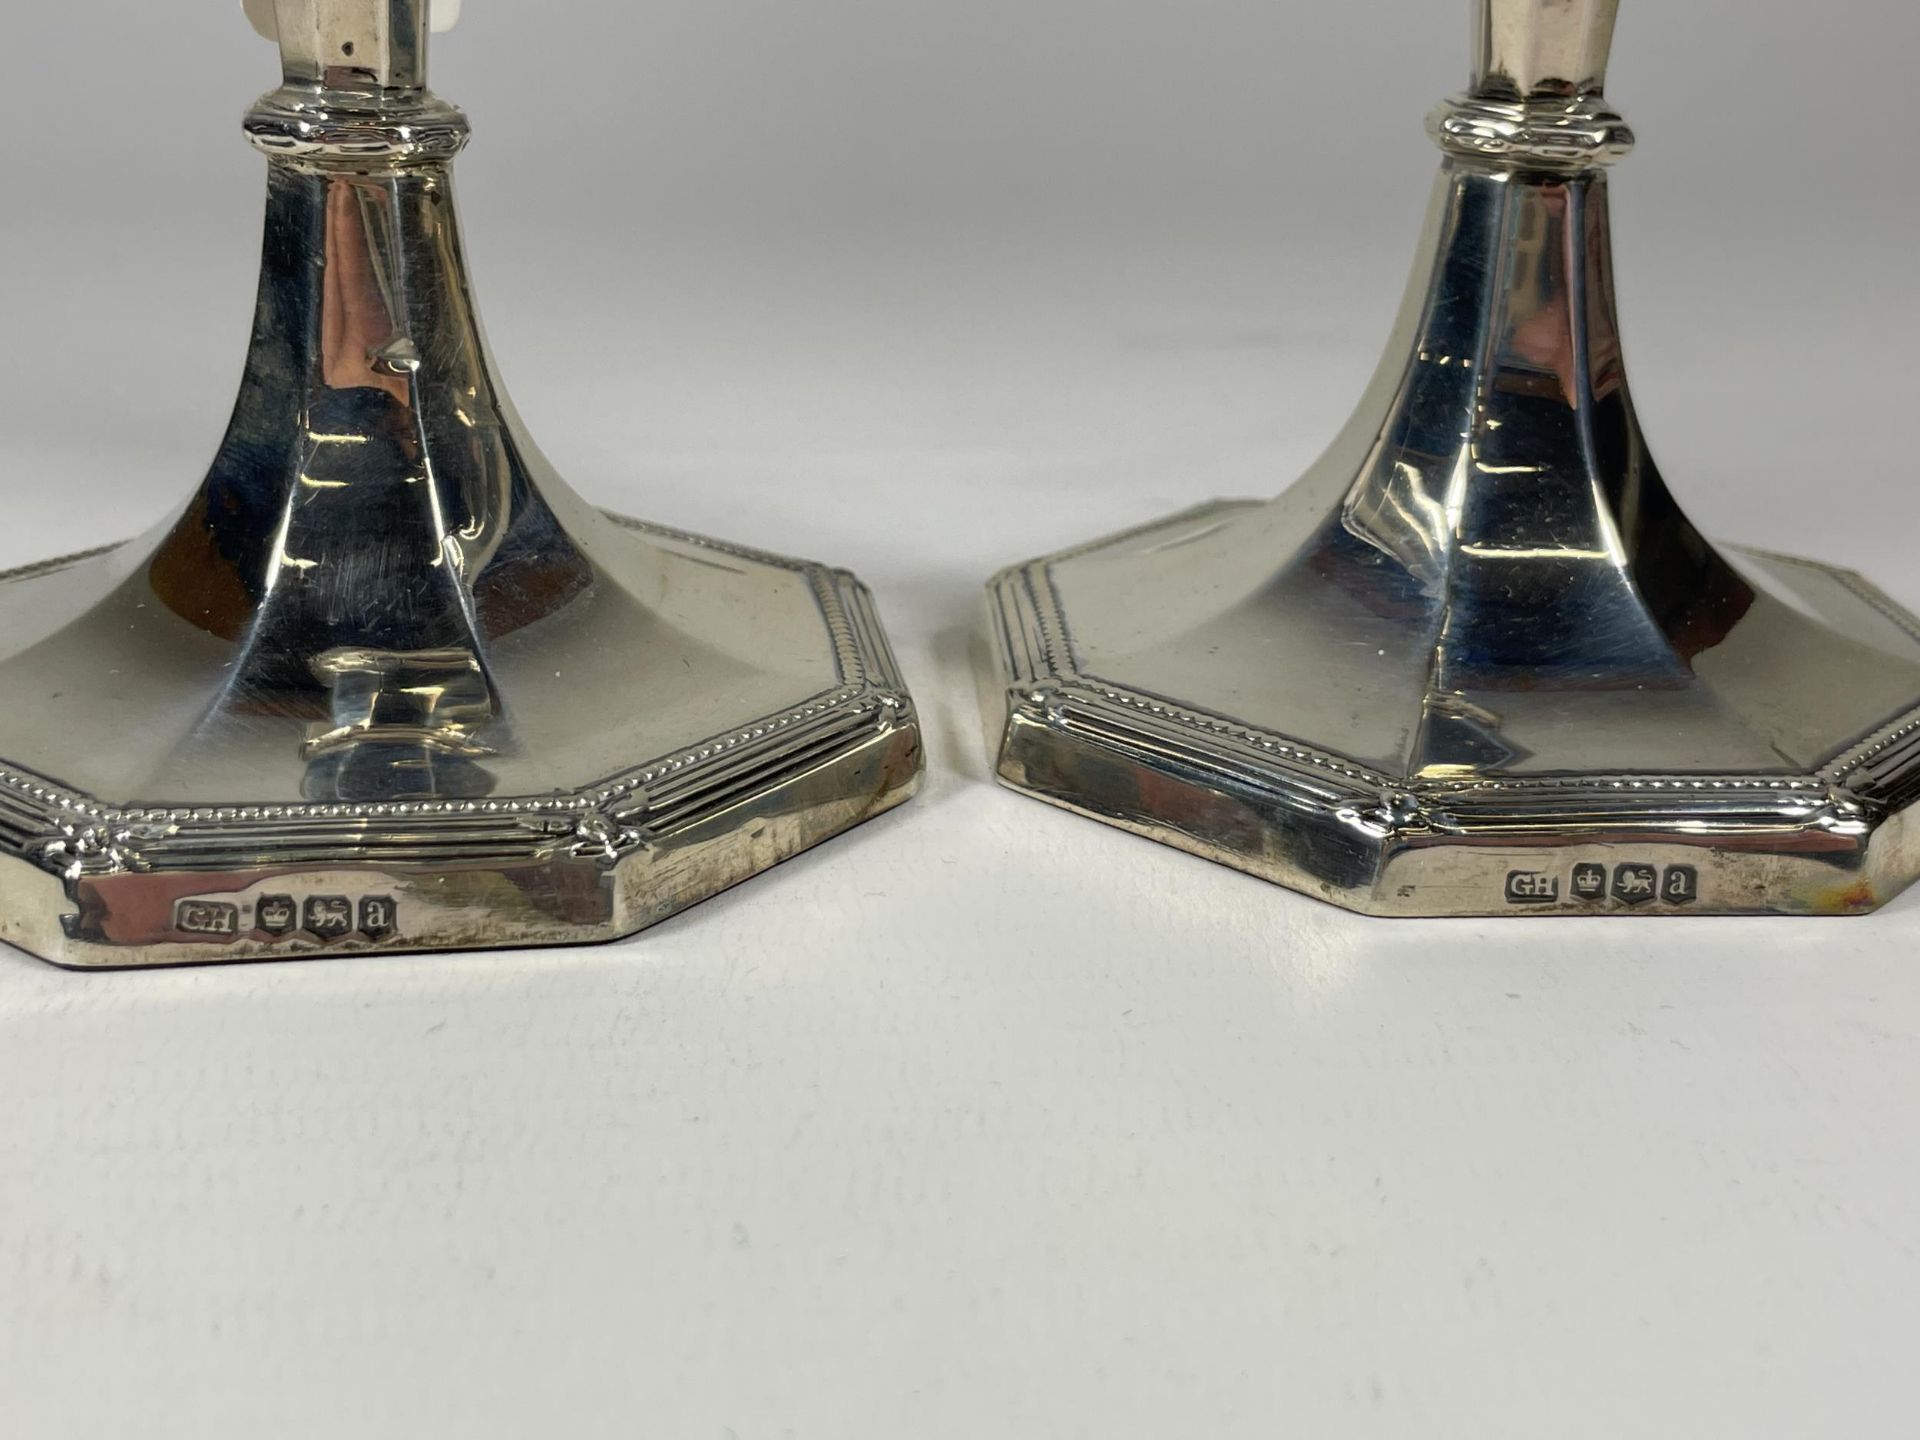 A PAIR OF GEORGE V SILVER CANDLESTICKS, HALLMARKS FOR SHEFFIELD, 1918, MAKERS HARRISON BROTHERS, - Image 2 of 4